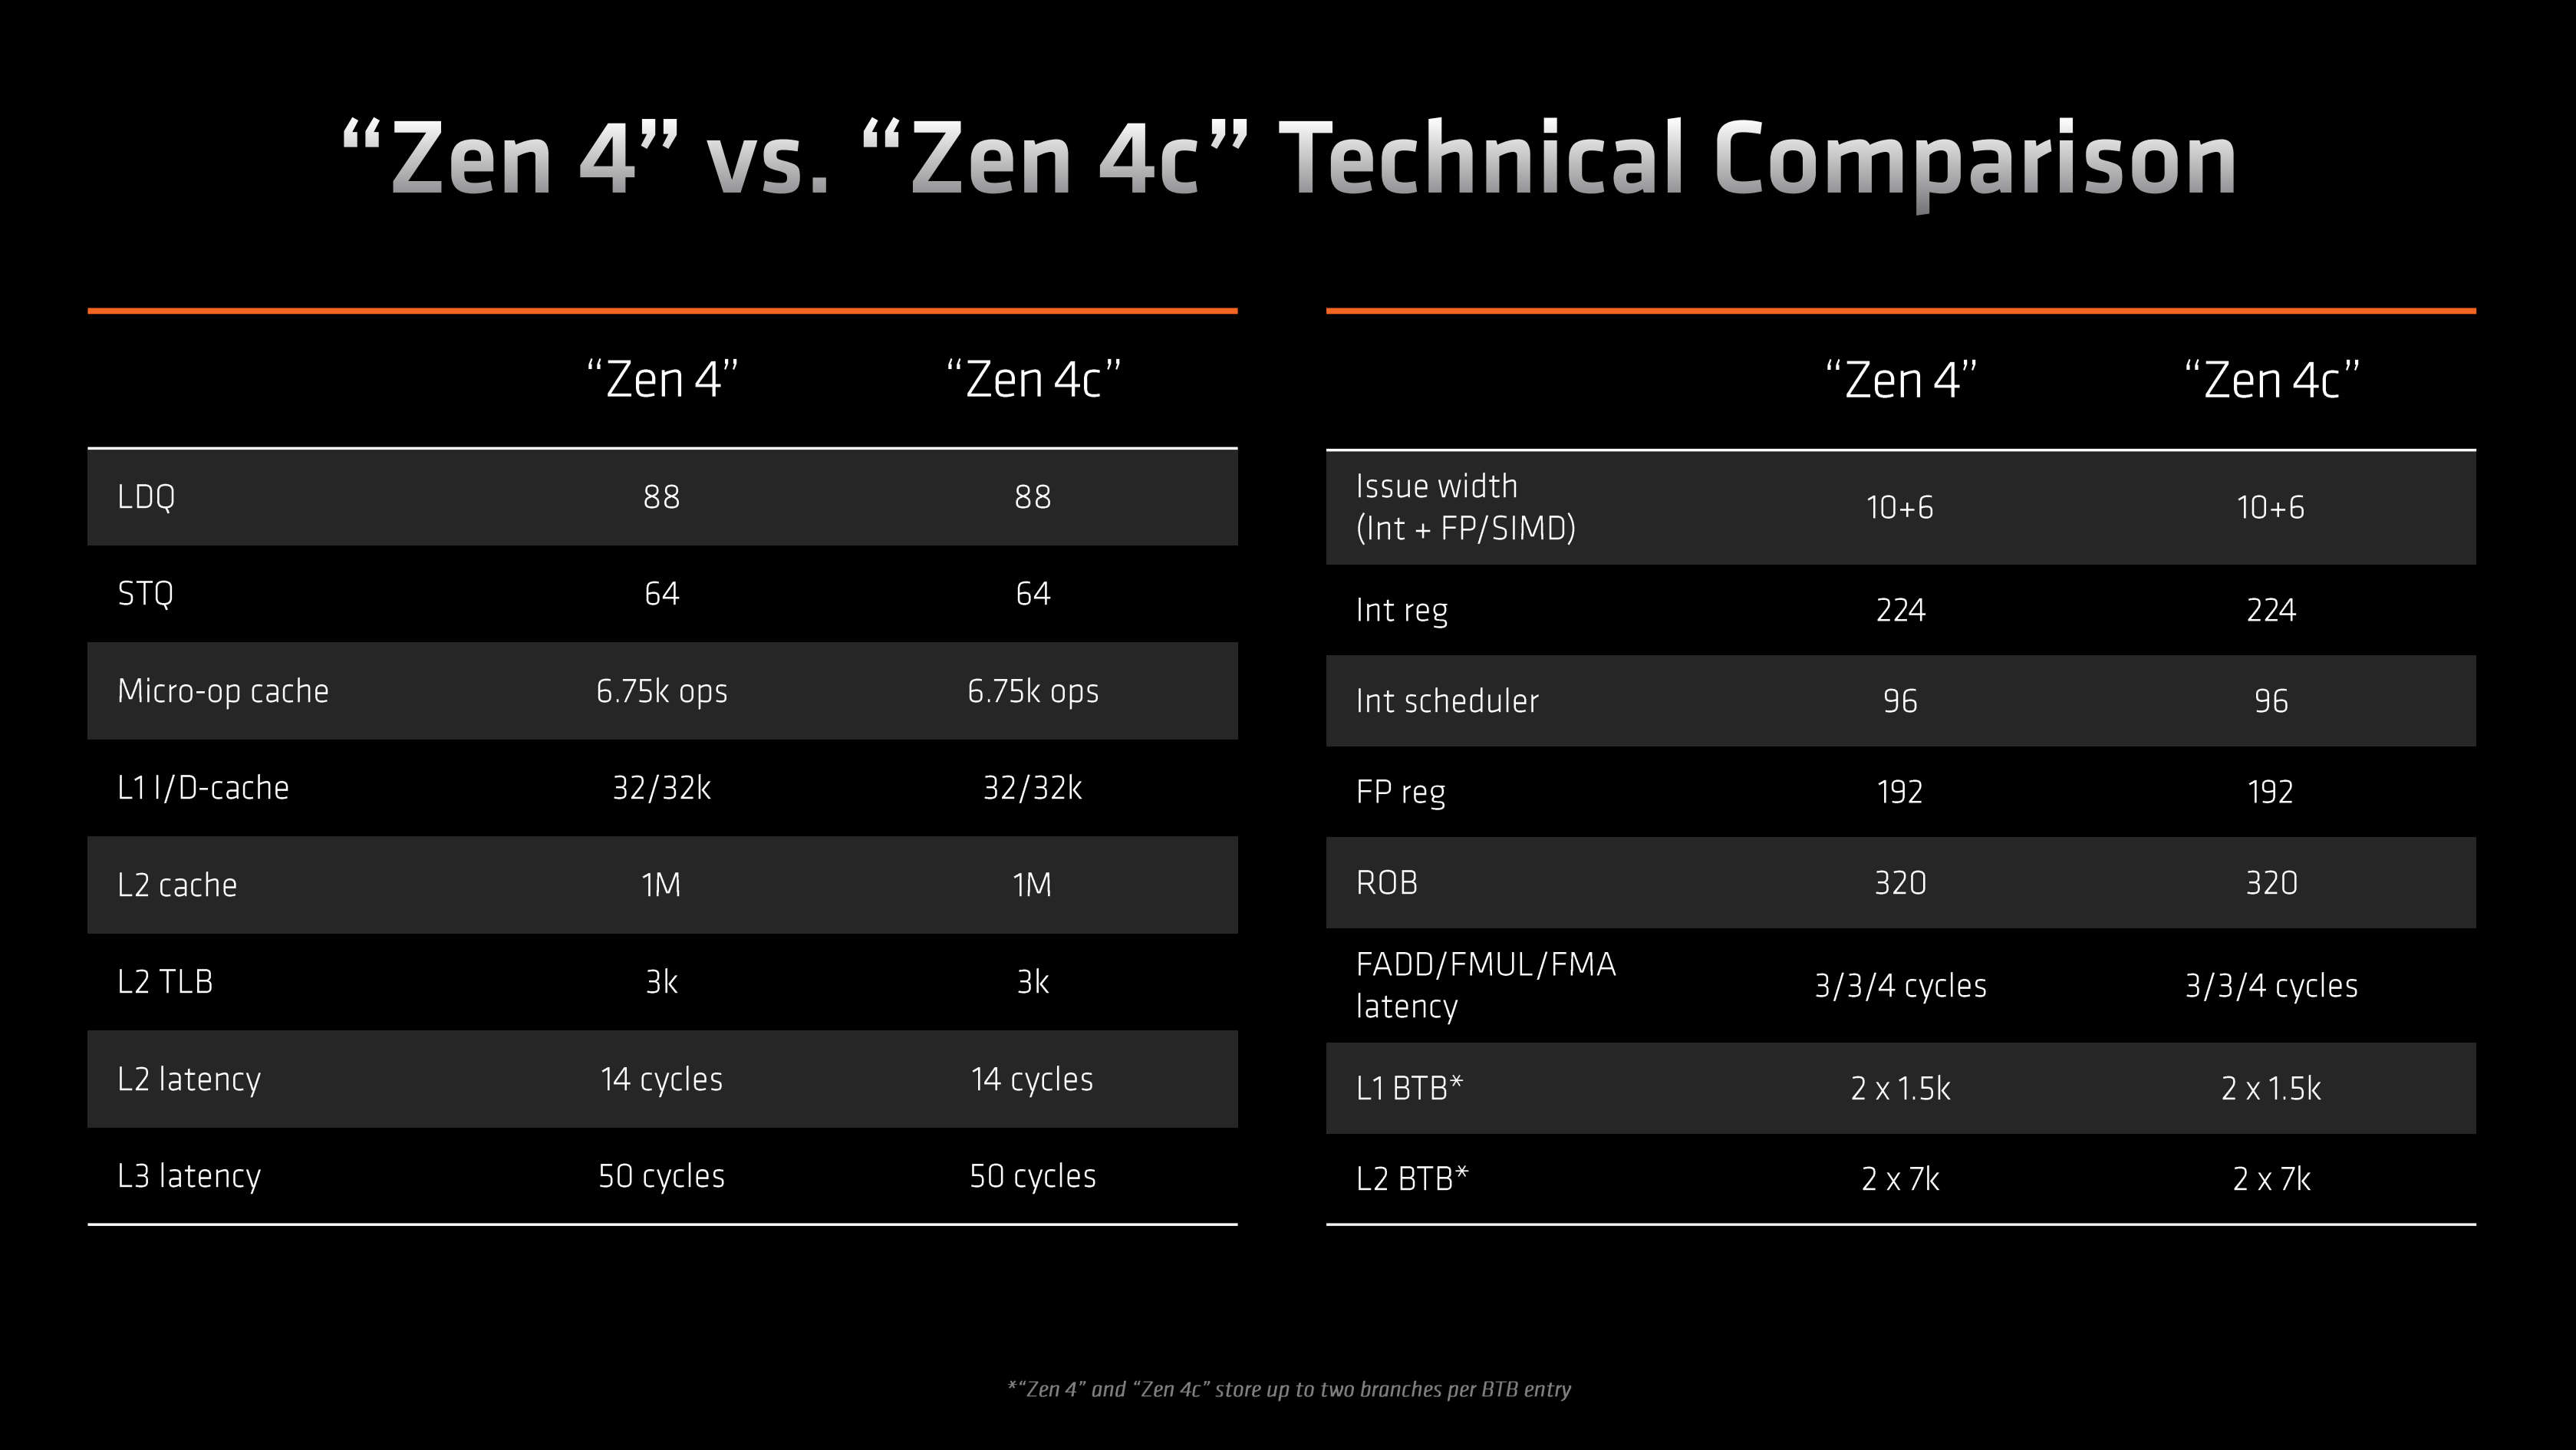 A table of specifications comparing AMD's Zen 4 architecture to Zen 4c